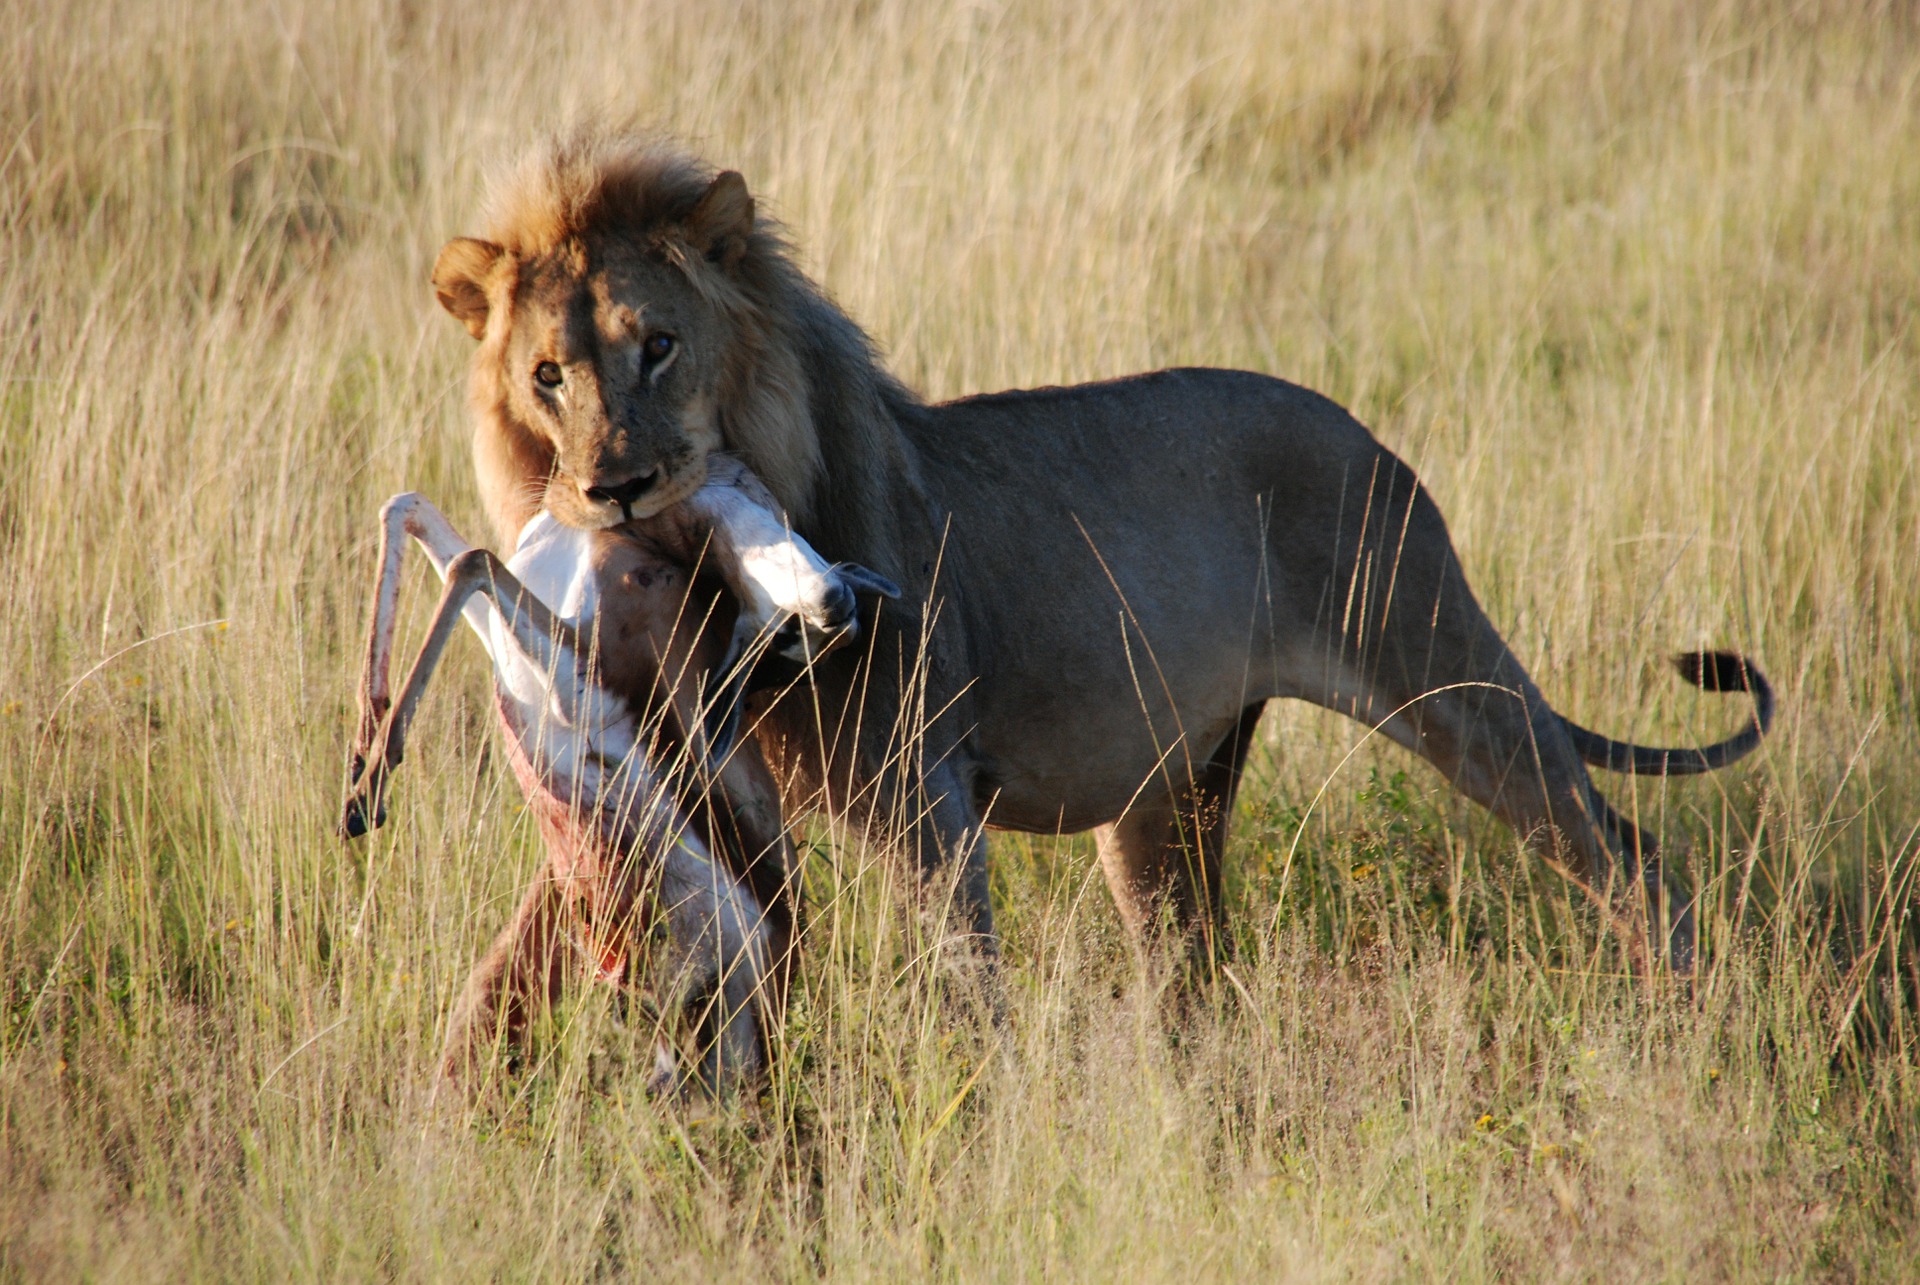 Lion after a kill in Etosha National Park, Namibia.